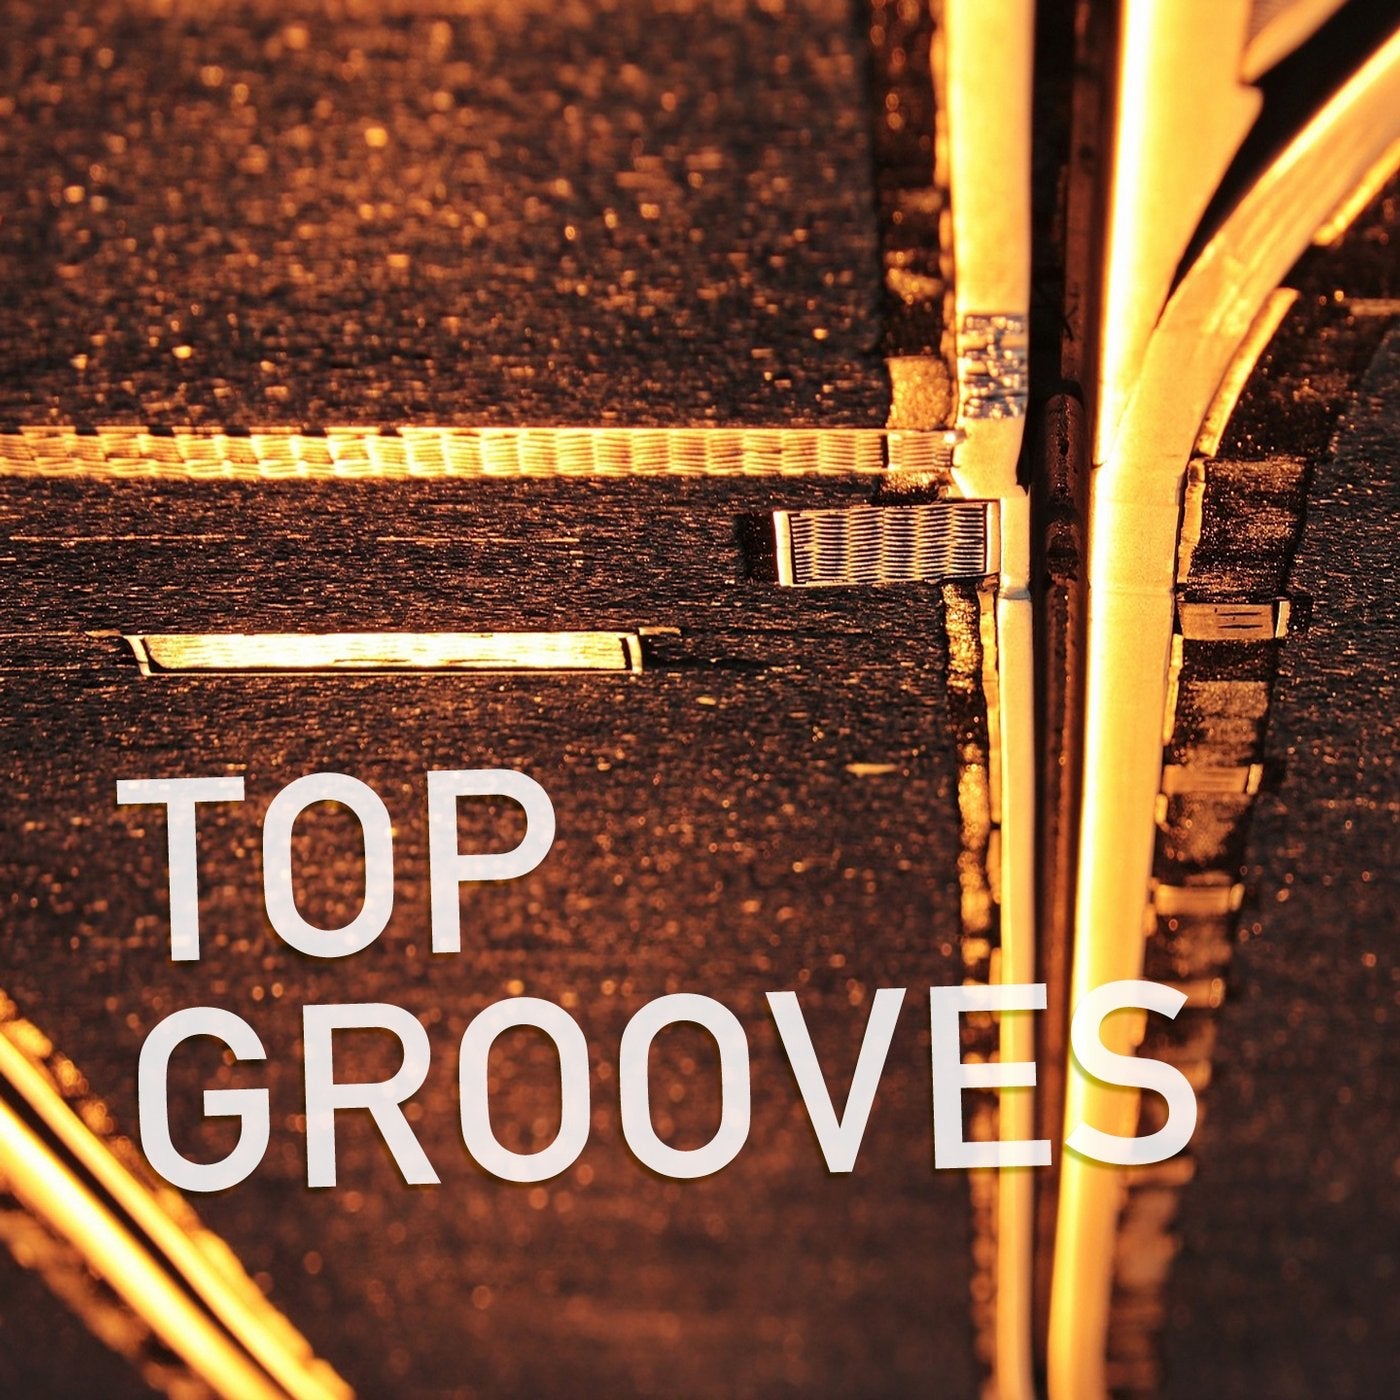 Top Grooves